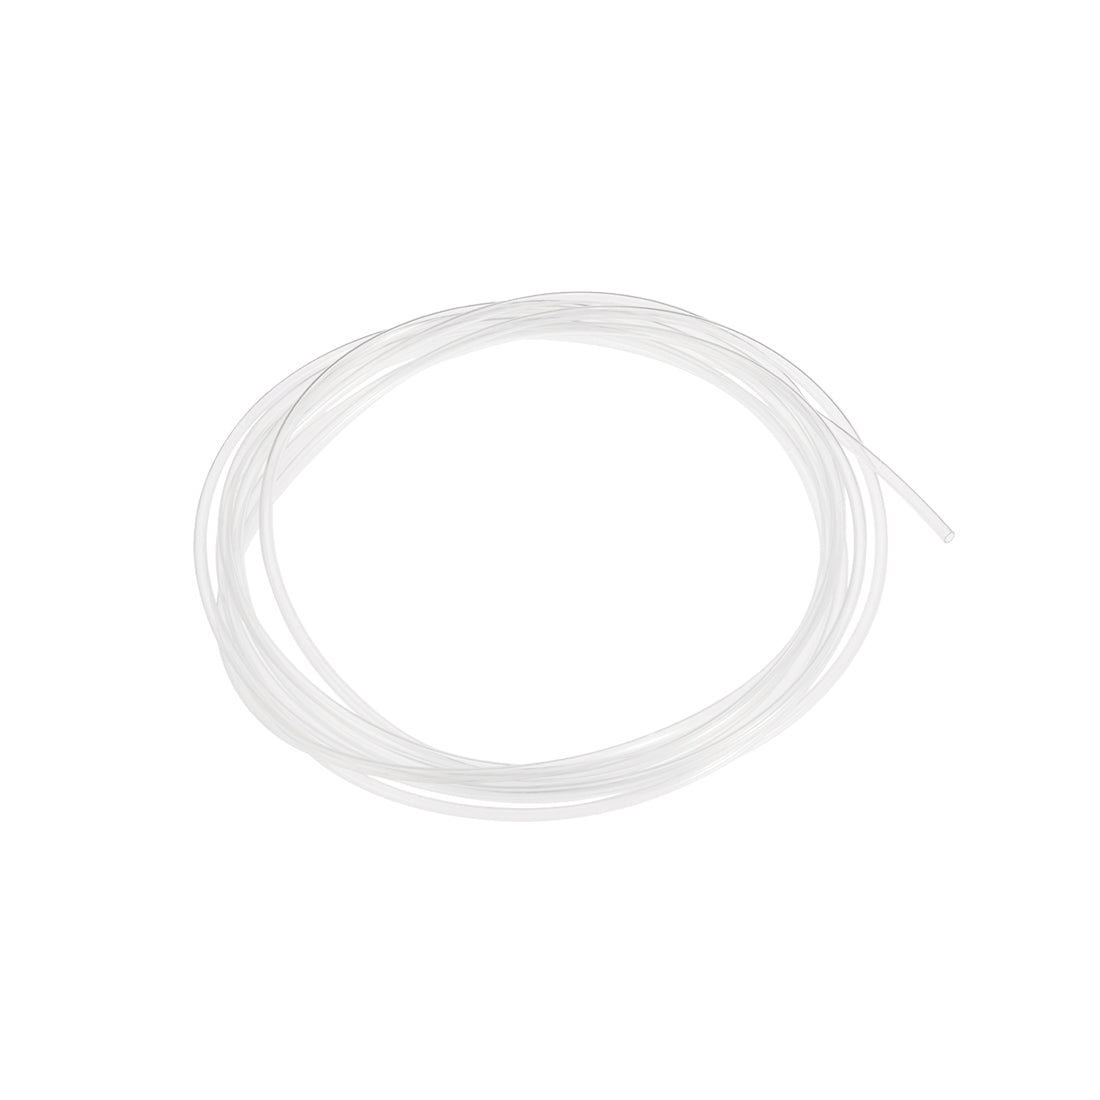 Uxcell Uxcell 3mm OD 2mm ID 3 Meter Long Nylon Tube for Air Line Brake Fluid Transfer Clear